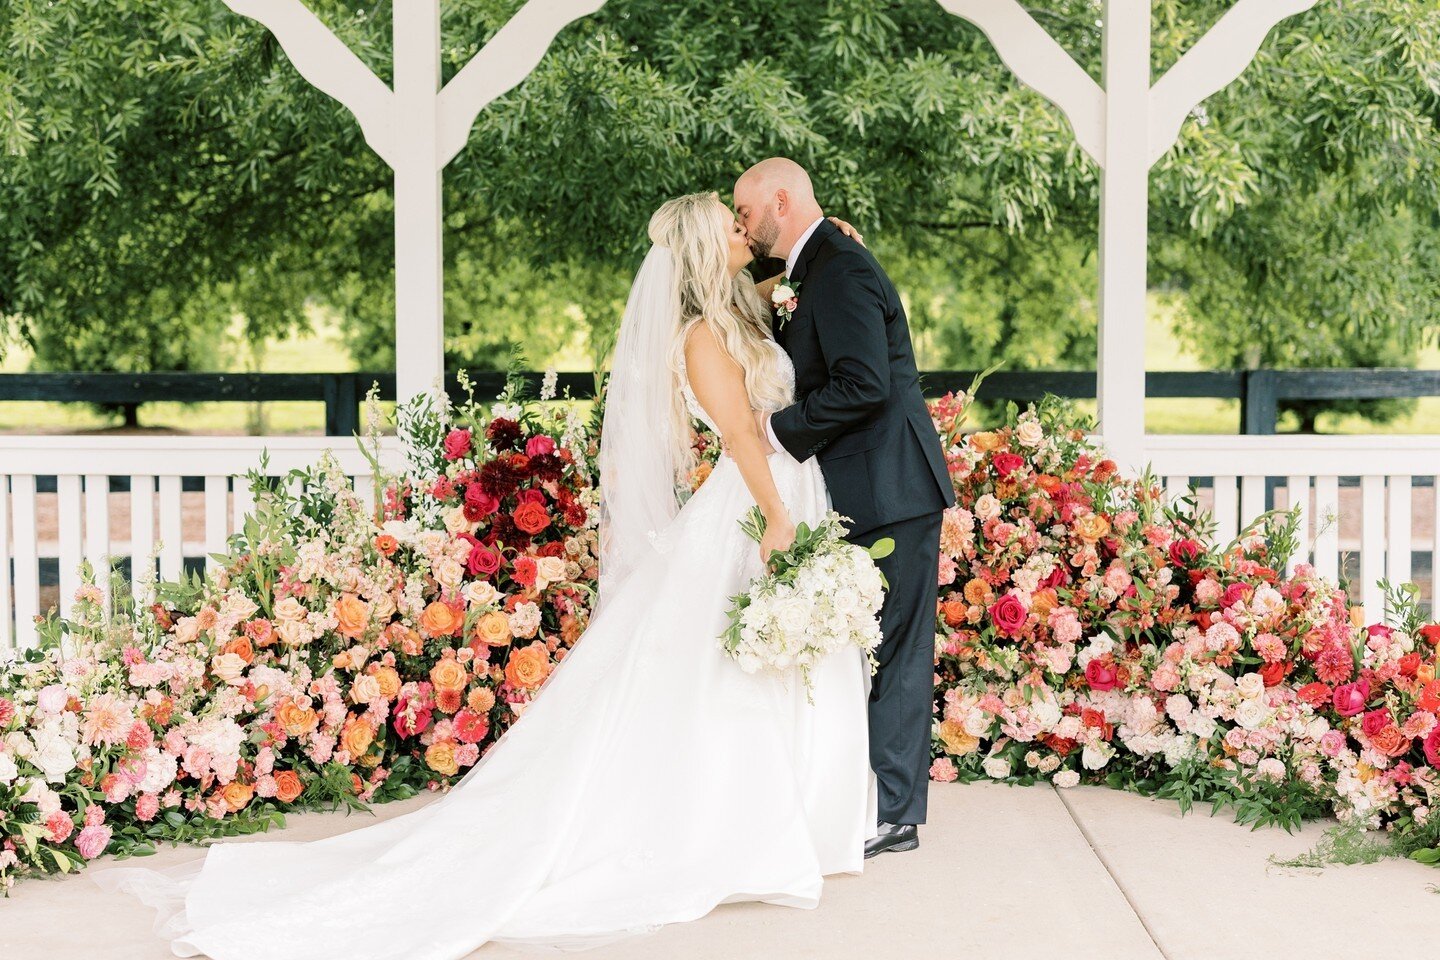 Can we just relive this day over and over?! We love when our couples have big ideas and even more so bringing those big ideas to life! ⁠
⁠
Venue: @whitelaurelestate⁠
Florals + Decor: @missmillys⁠
Photo: @macyoconnellphoto⁠
MUA: @amandamoraismakeupga⁠